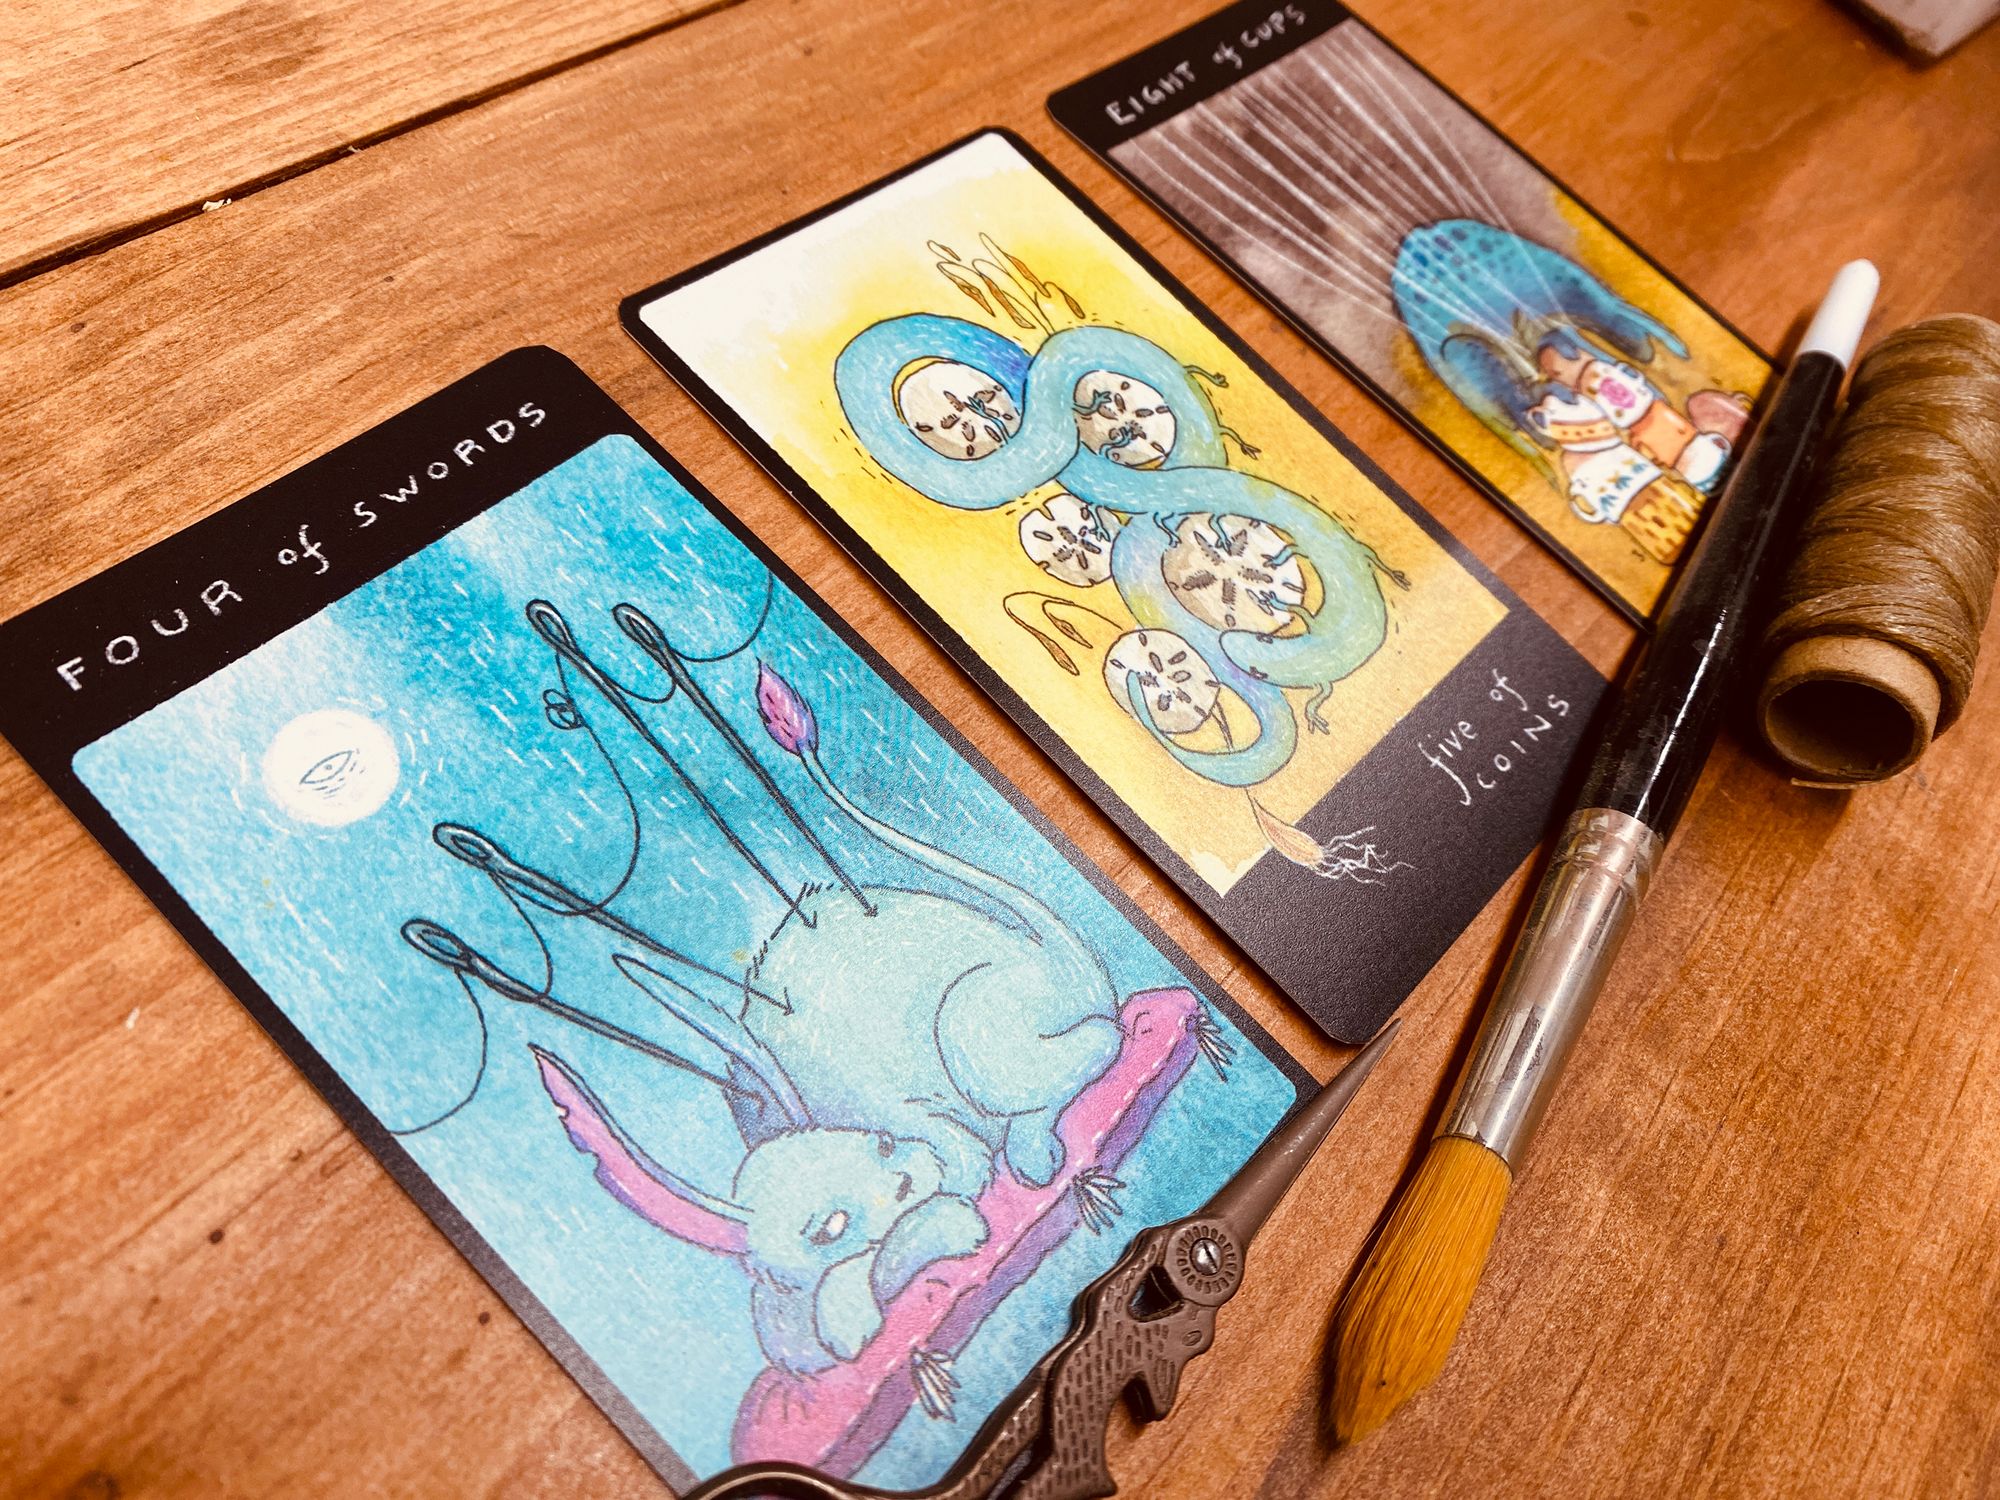 A diagonally angled shot of three tarot cards lined up over a pair of sewing scissors, a paintbrush, and a skein of brown thread. The cards are the Four of Swords (a fluffy beast with rabbit-like ears and a lion's tail reclining on a cushion while four threaded needles are poked upright into the central mass of its body), the Five of Coins (a serpentine, salamander-like creature encircles five sand dollars) and the Eight of Cups (a little blurred out, but a spotted reptile-like creature perches atop a stack of colourful tea cups.)